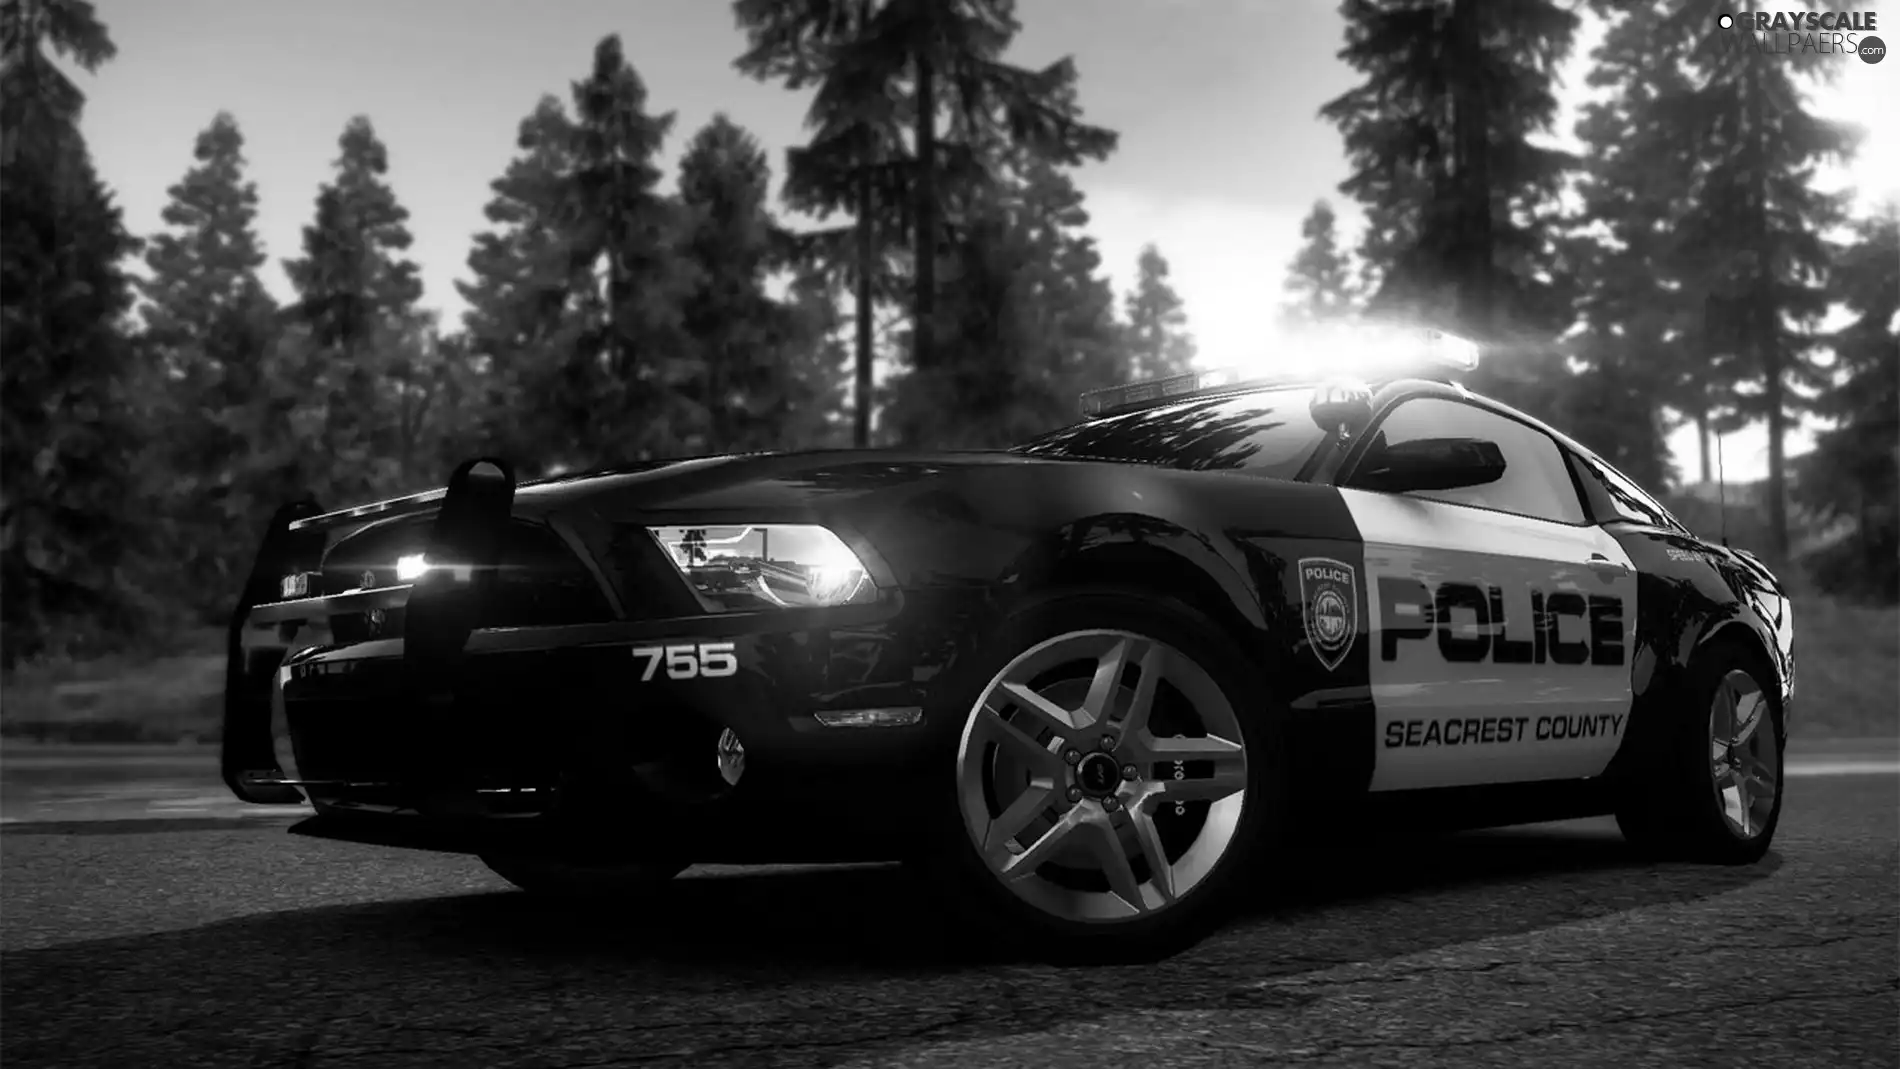 wagon, police, Hot Pursuit, PS3, Need For Speed